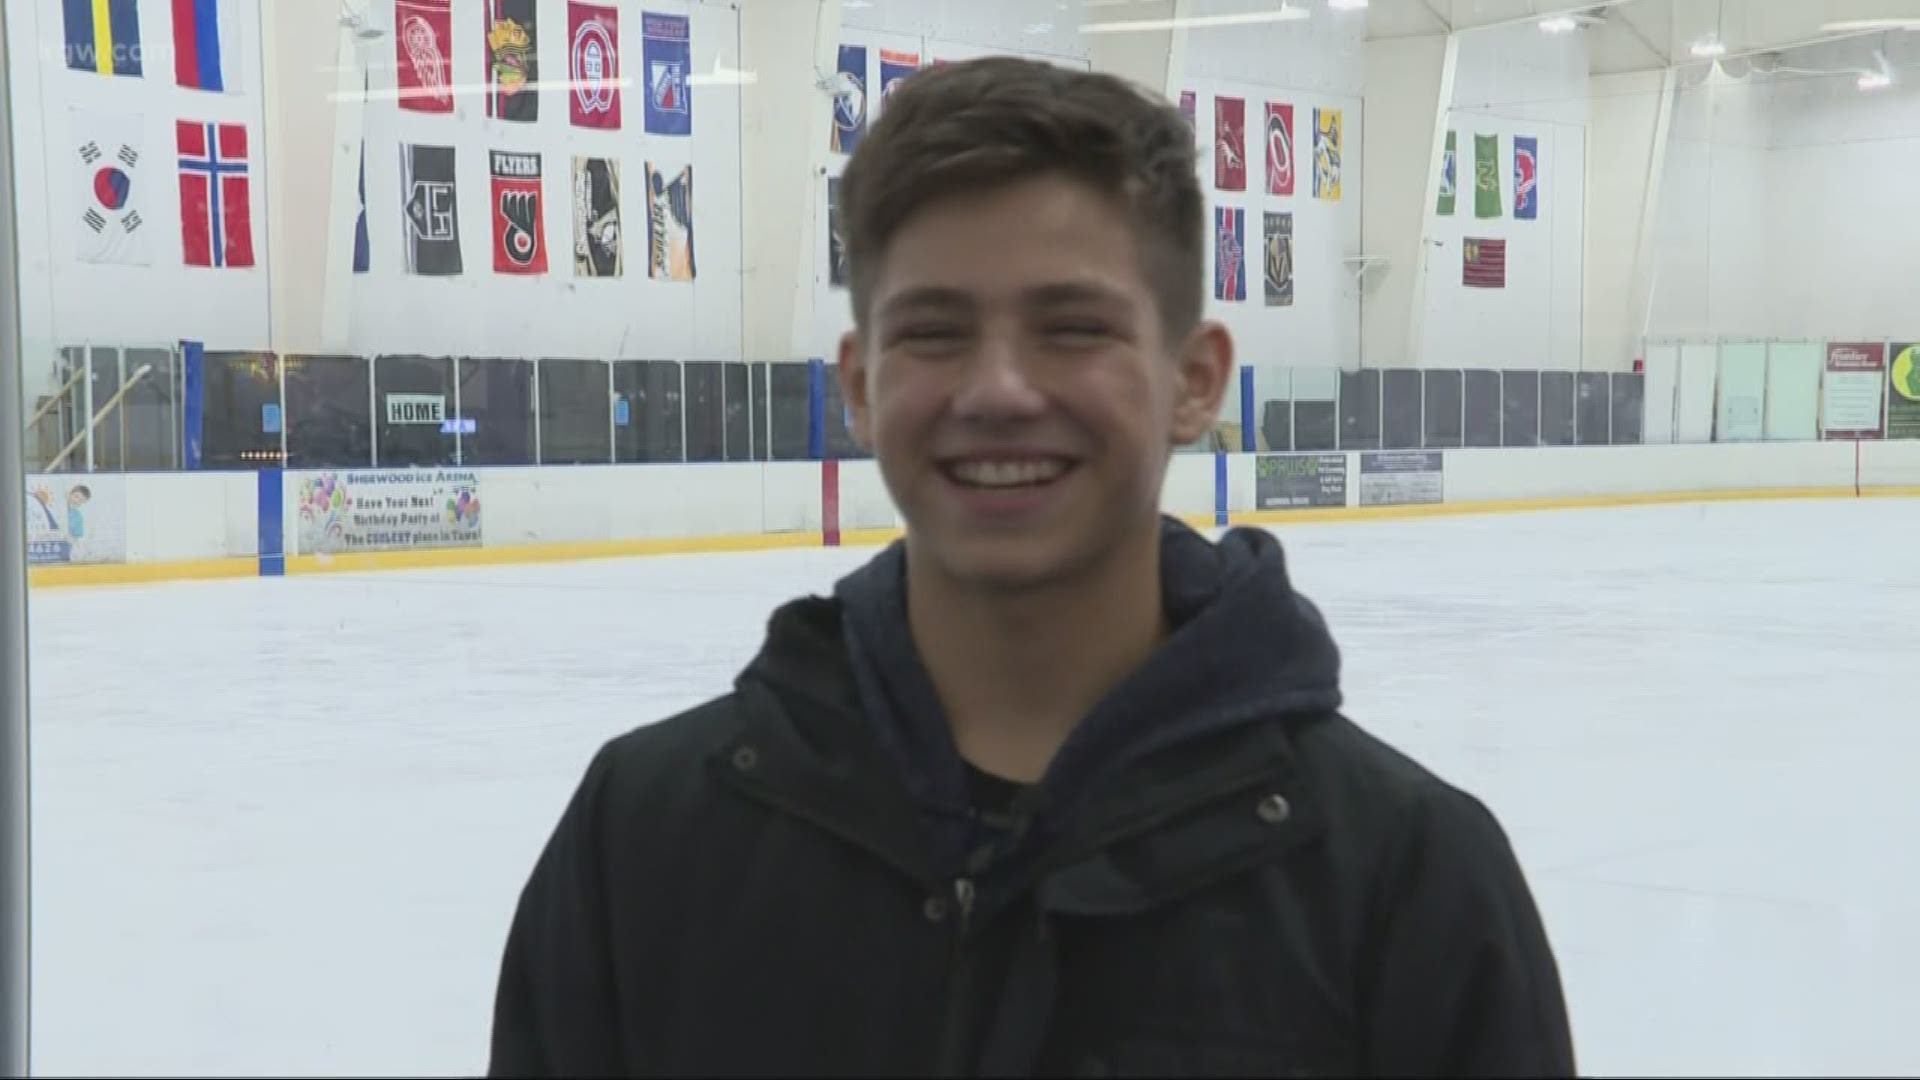 Local teen skater Samuel Mindra is making a return trip to the U.S. Skating Nationals. It’s his third time competing at the national event.